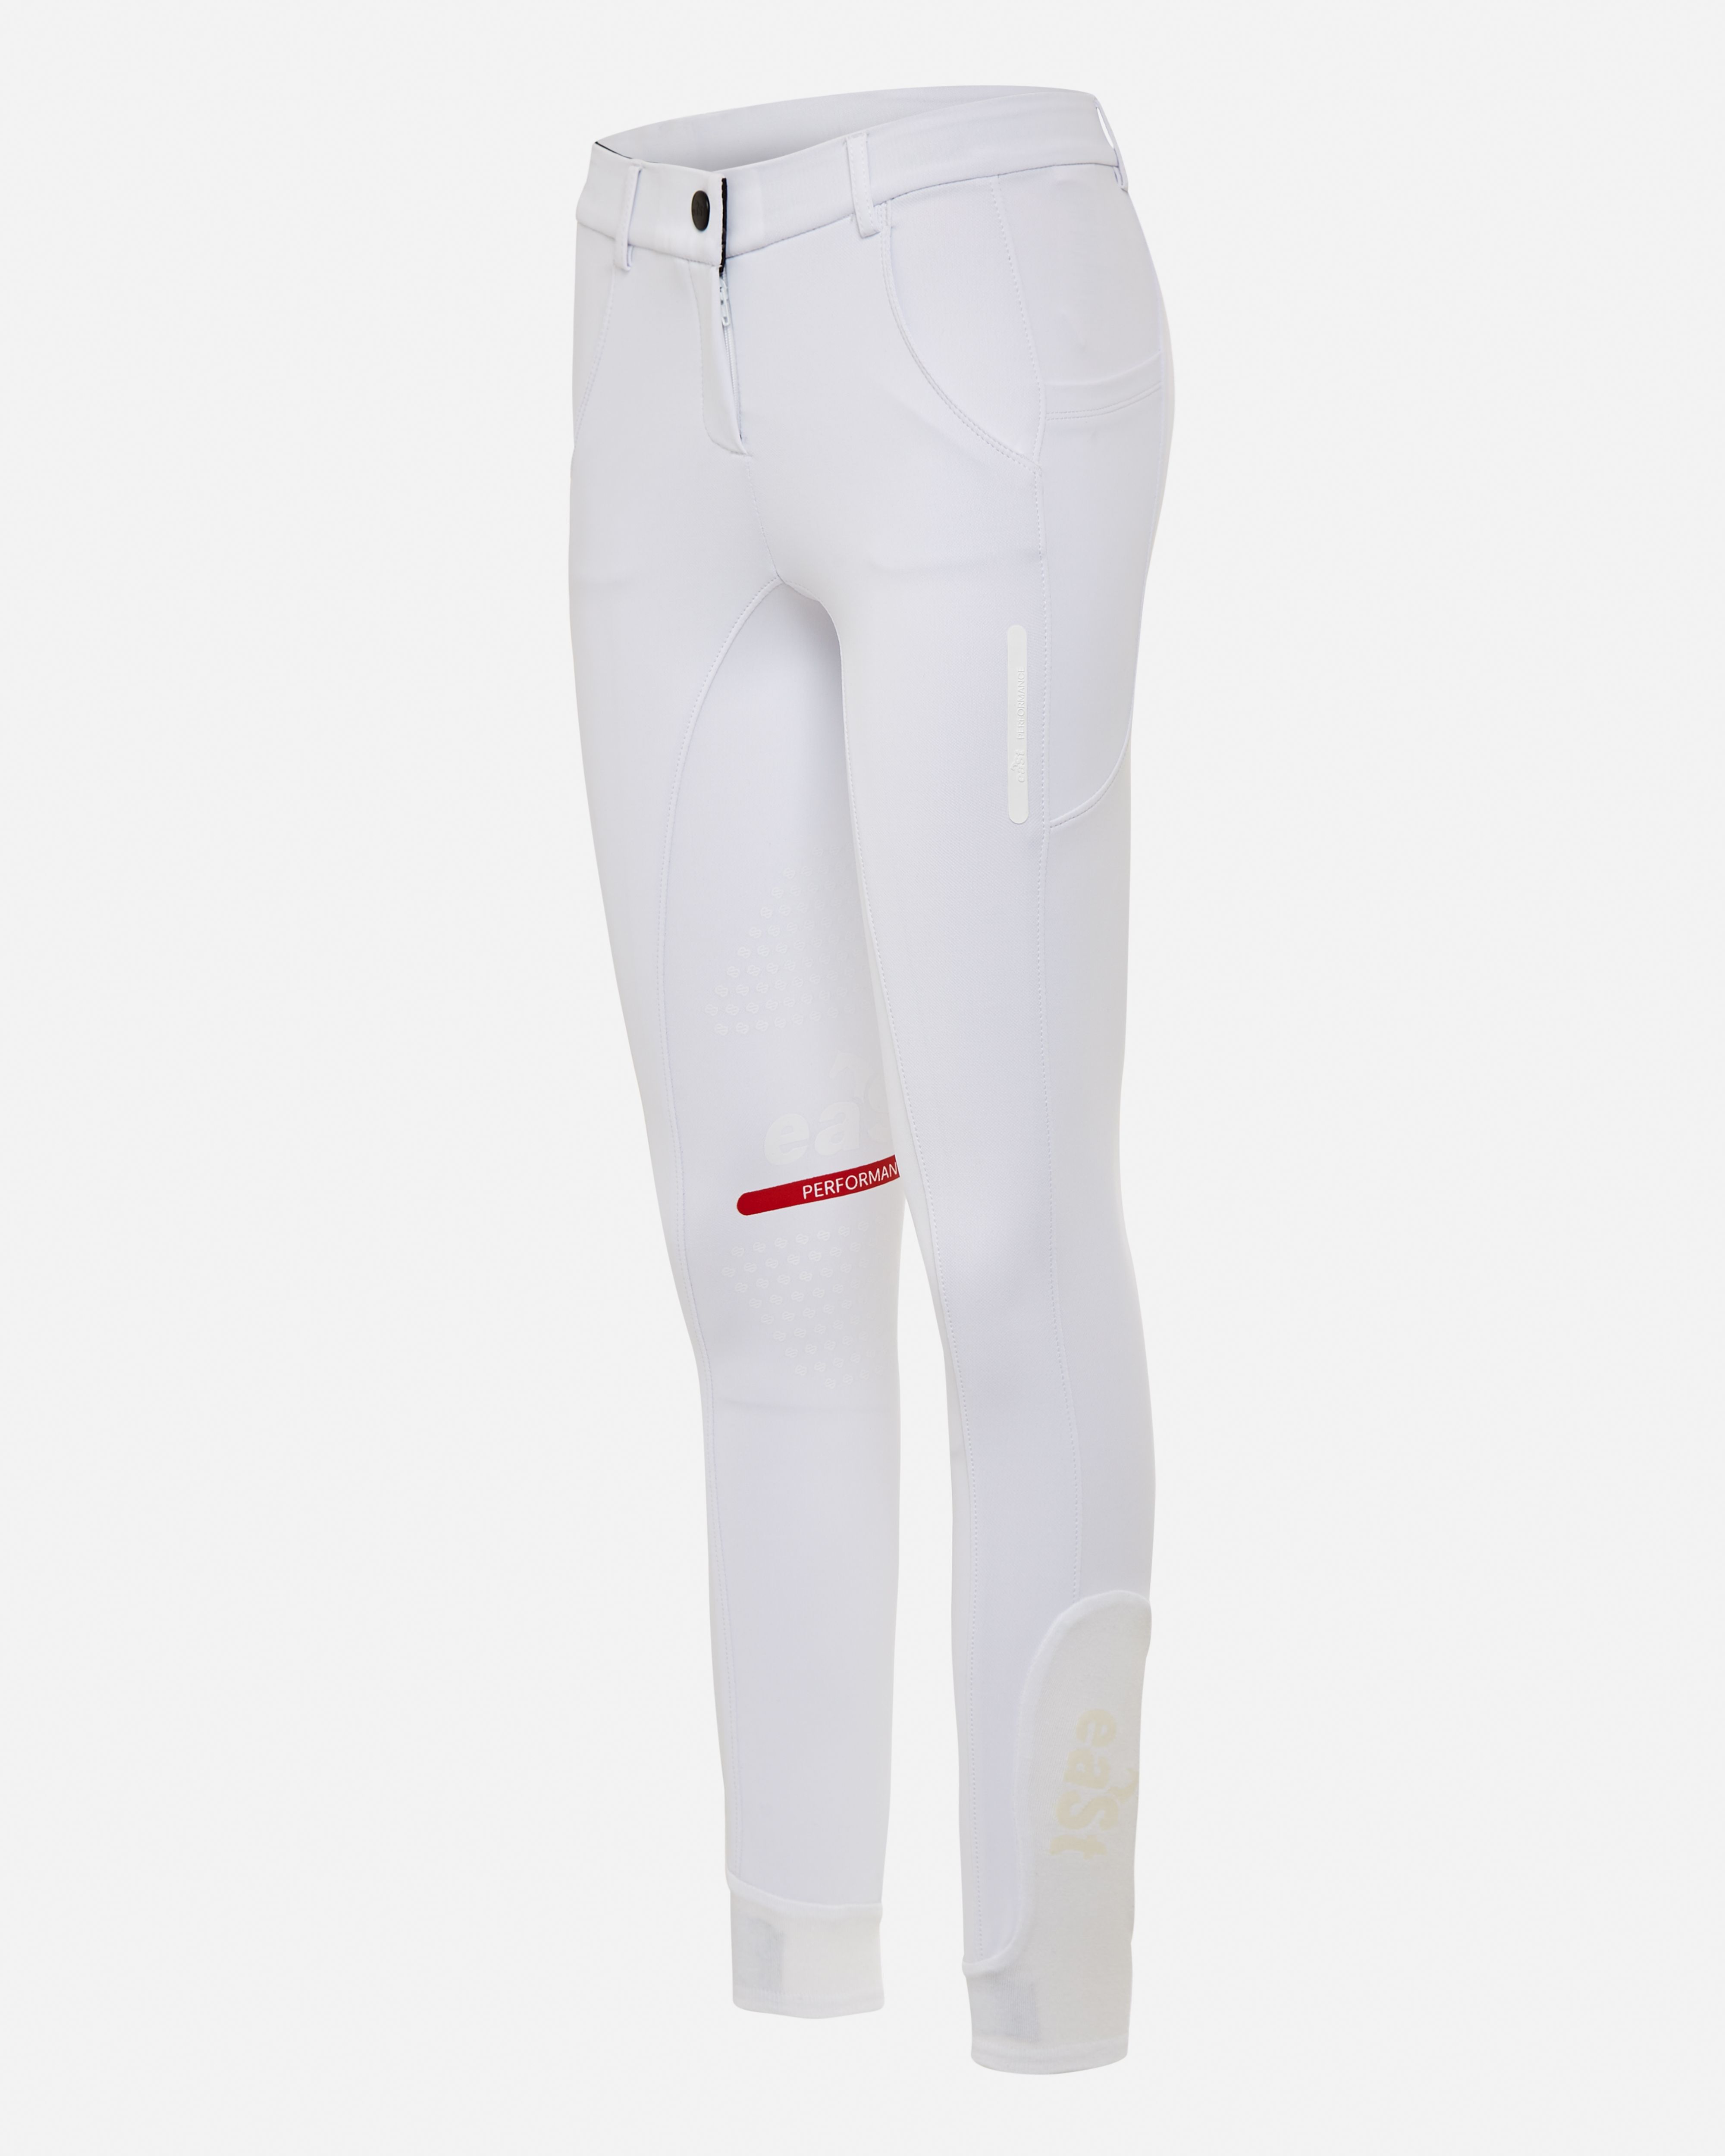 eaSt R2 Performance Jumping | White | XL